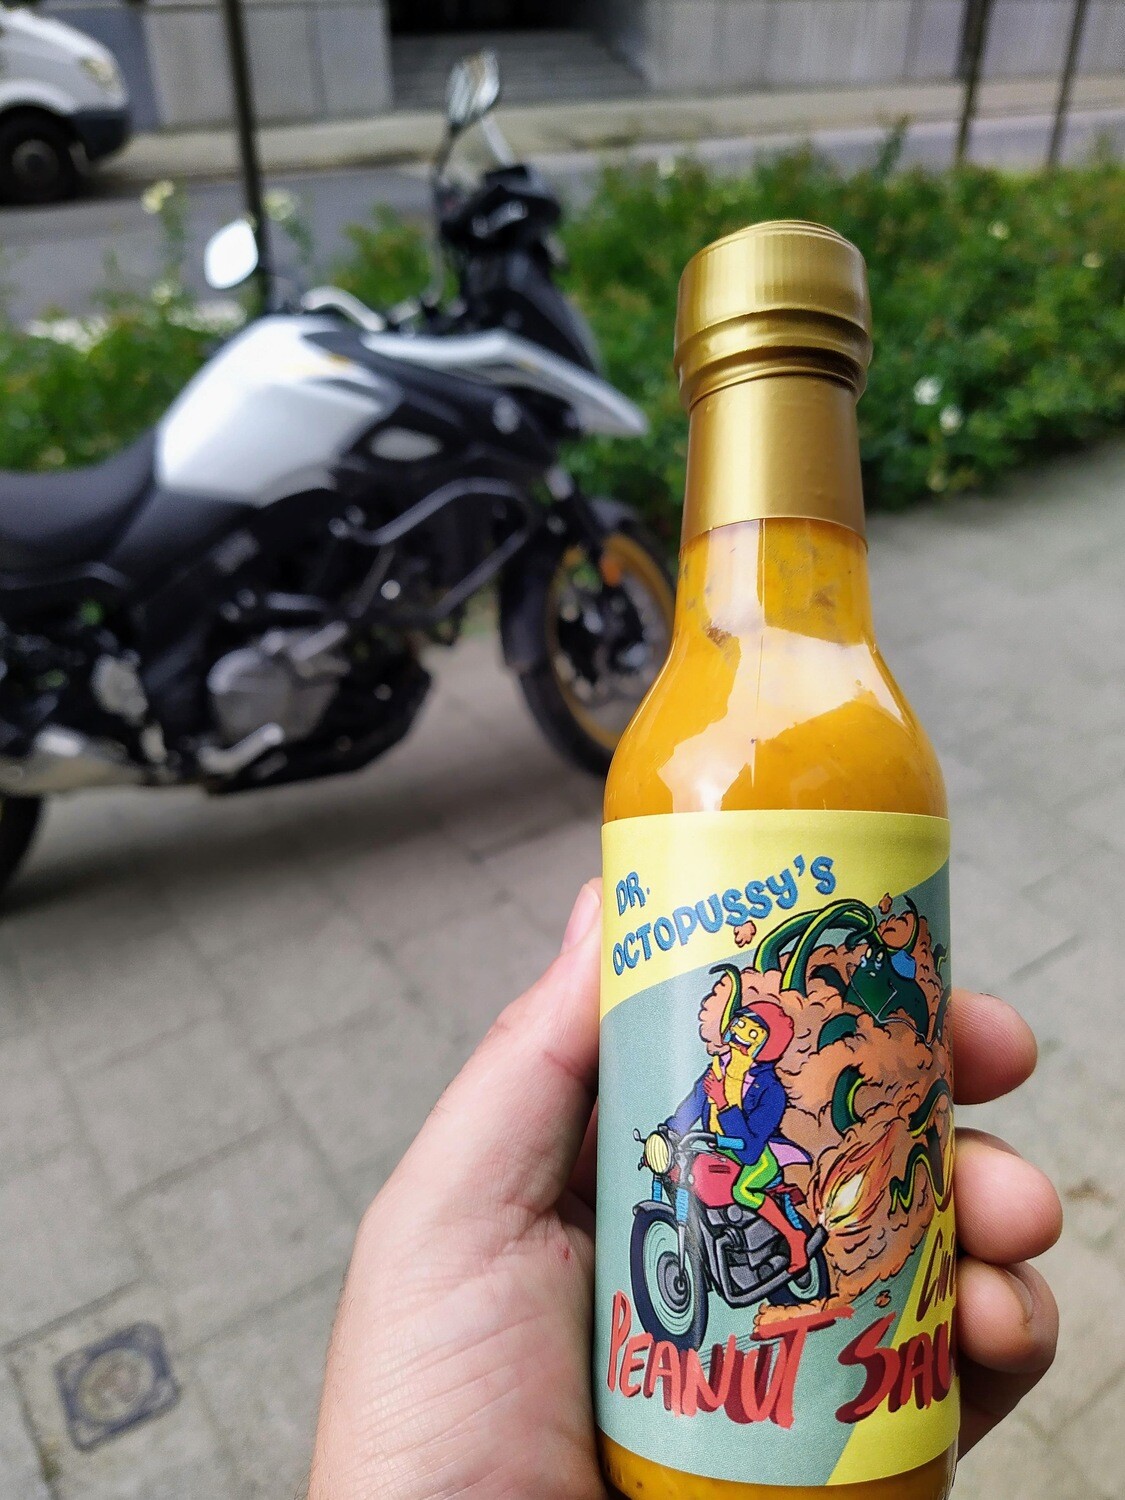 Dr. Octopussy's Smoking Burn-out Chili Lime Peanut sauce - 200ml